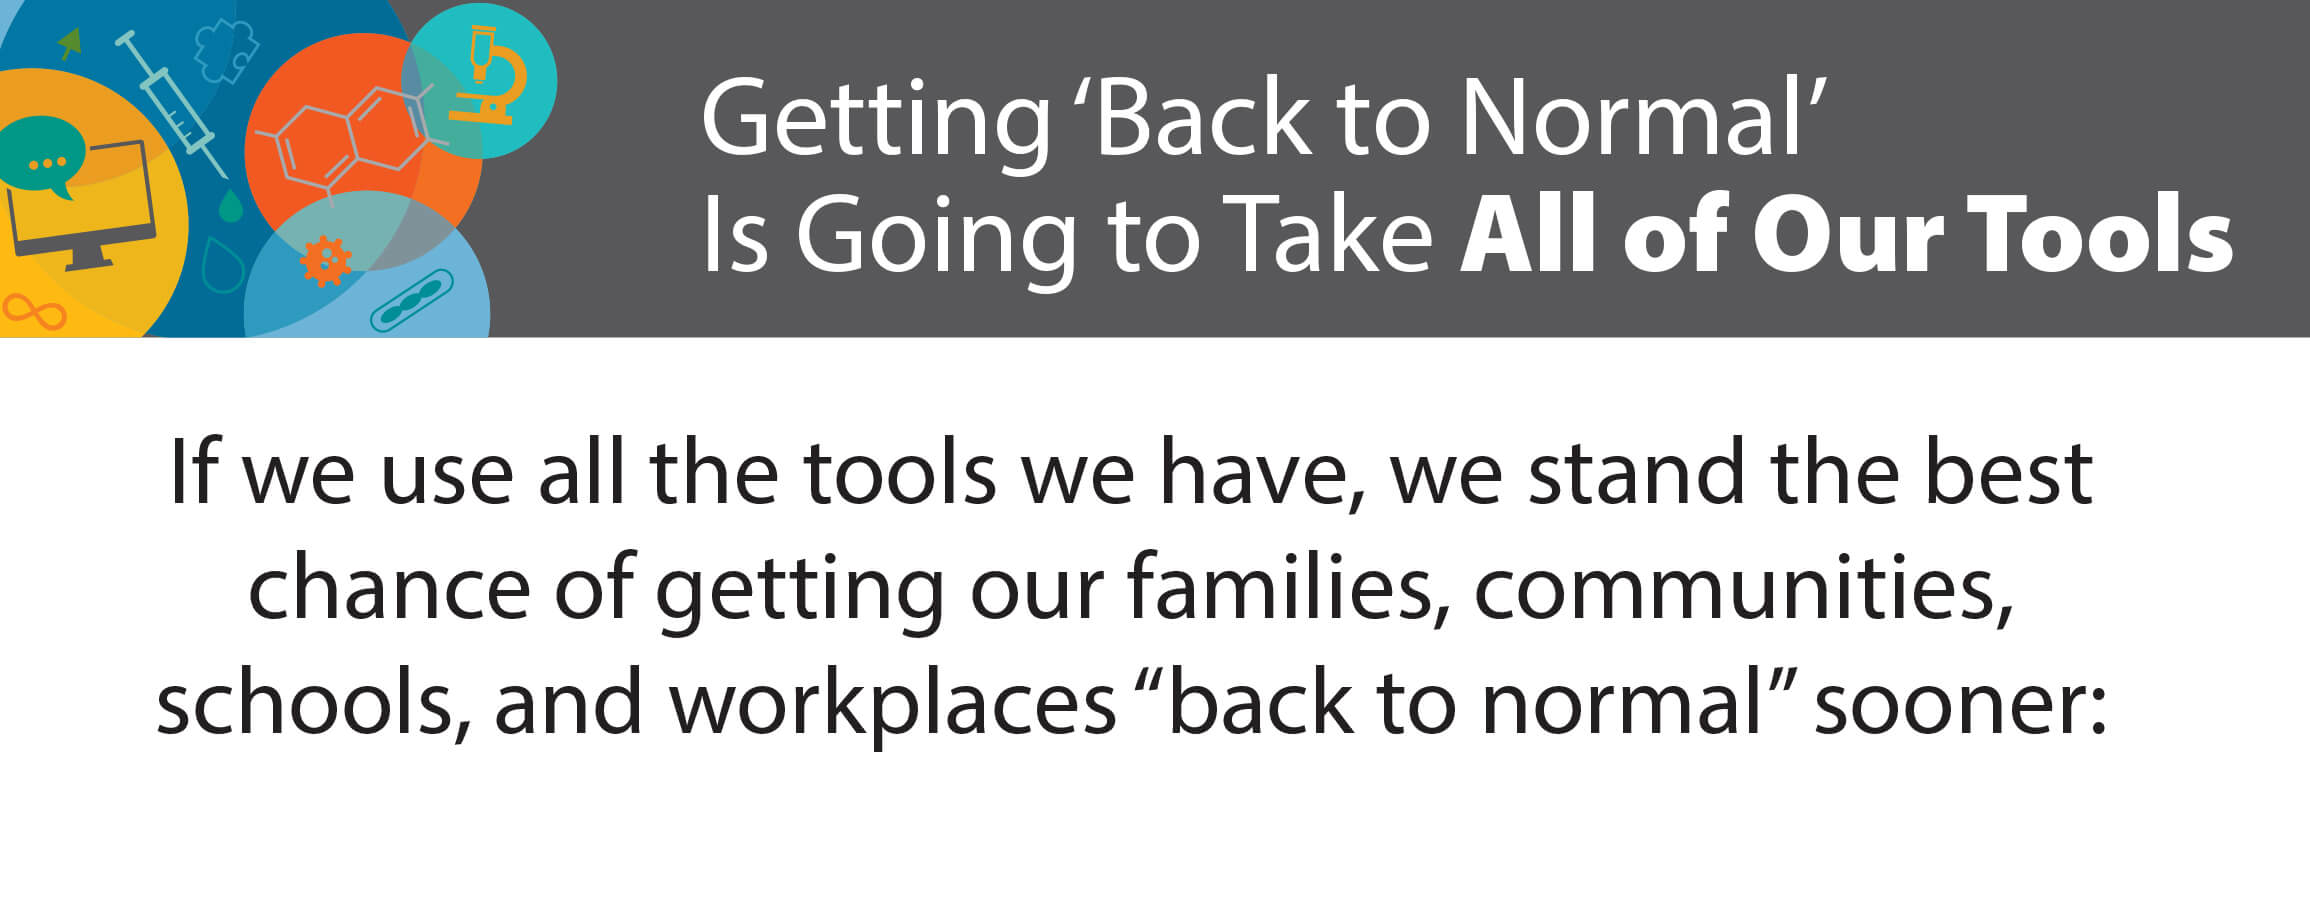 Getting ‘Back to Normal’ is Going to Take All of Our Tools